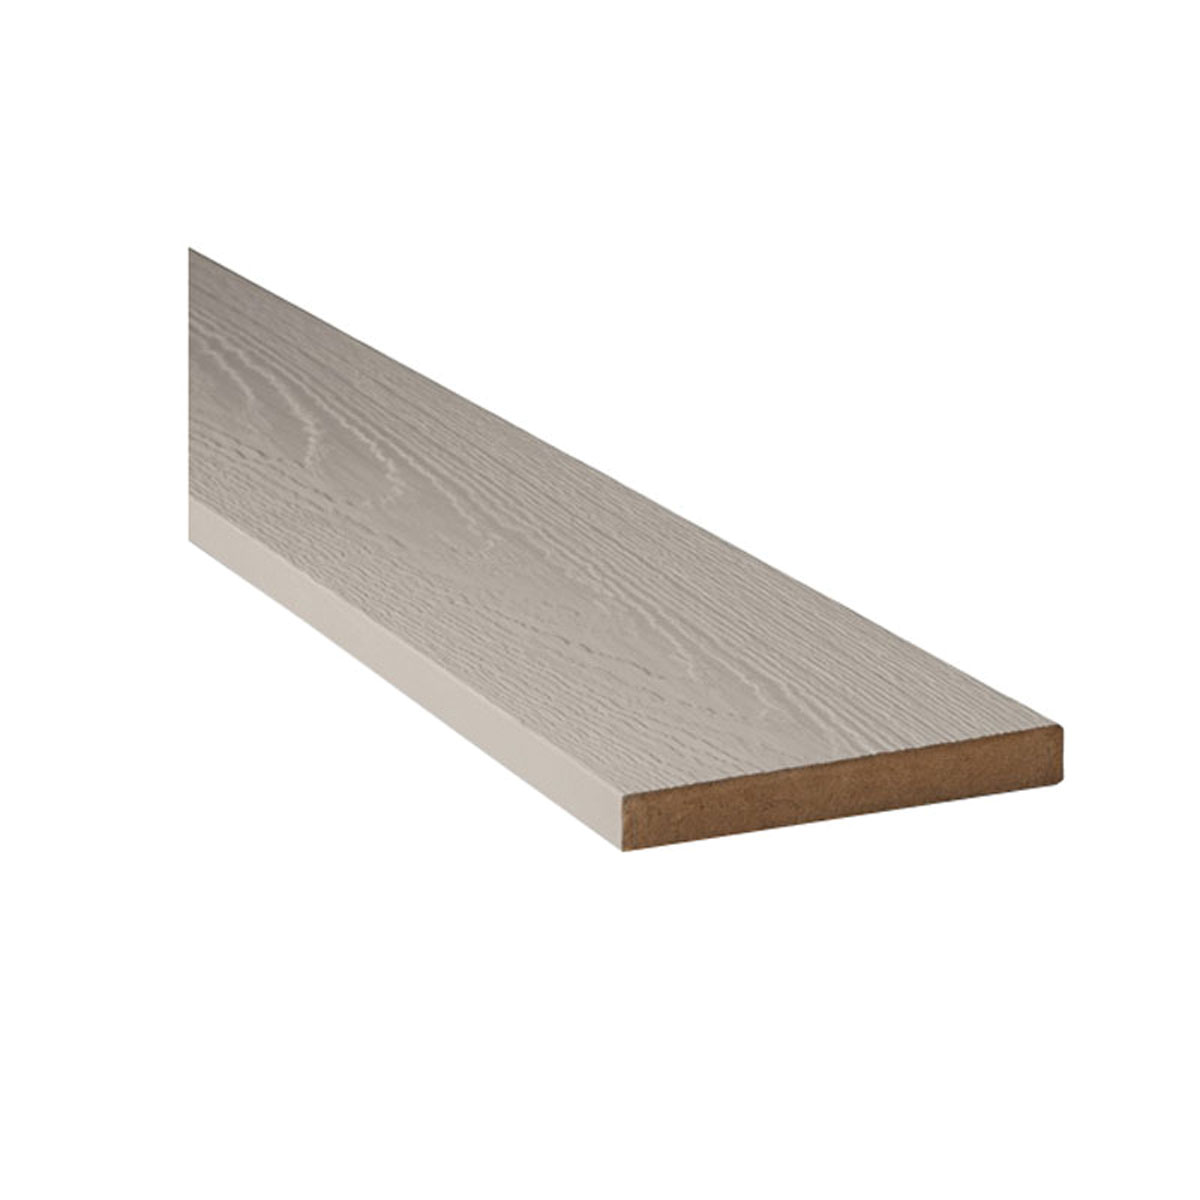 7000220N Exterior Trim, 16 ft L, 2 in W, 3/4 in Thick, Reversible Profile/Pattern, Wood, Smooth/Woodgrain